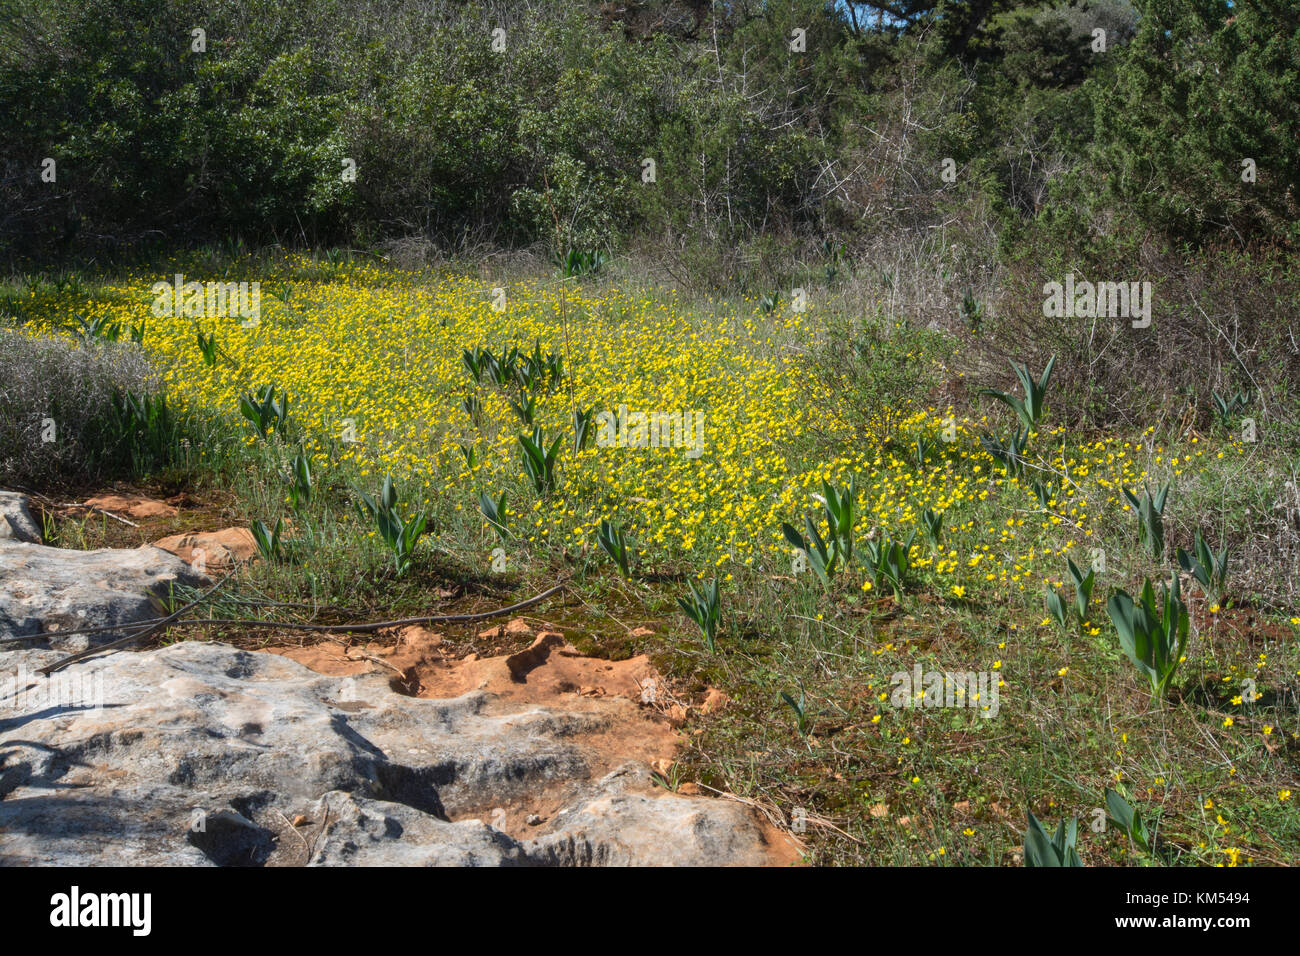 Limestone pavement scenery in the Pegeia Forest in Cyprus with a carpet of Ranunculus bullatus (autumn buttercups) Stock Photo